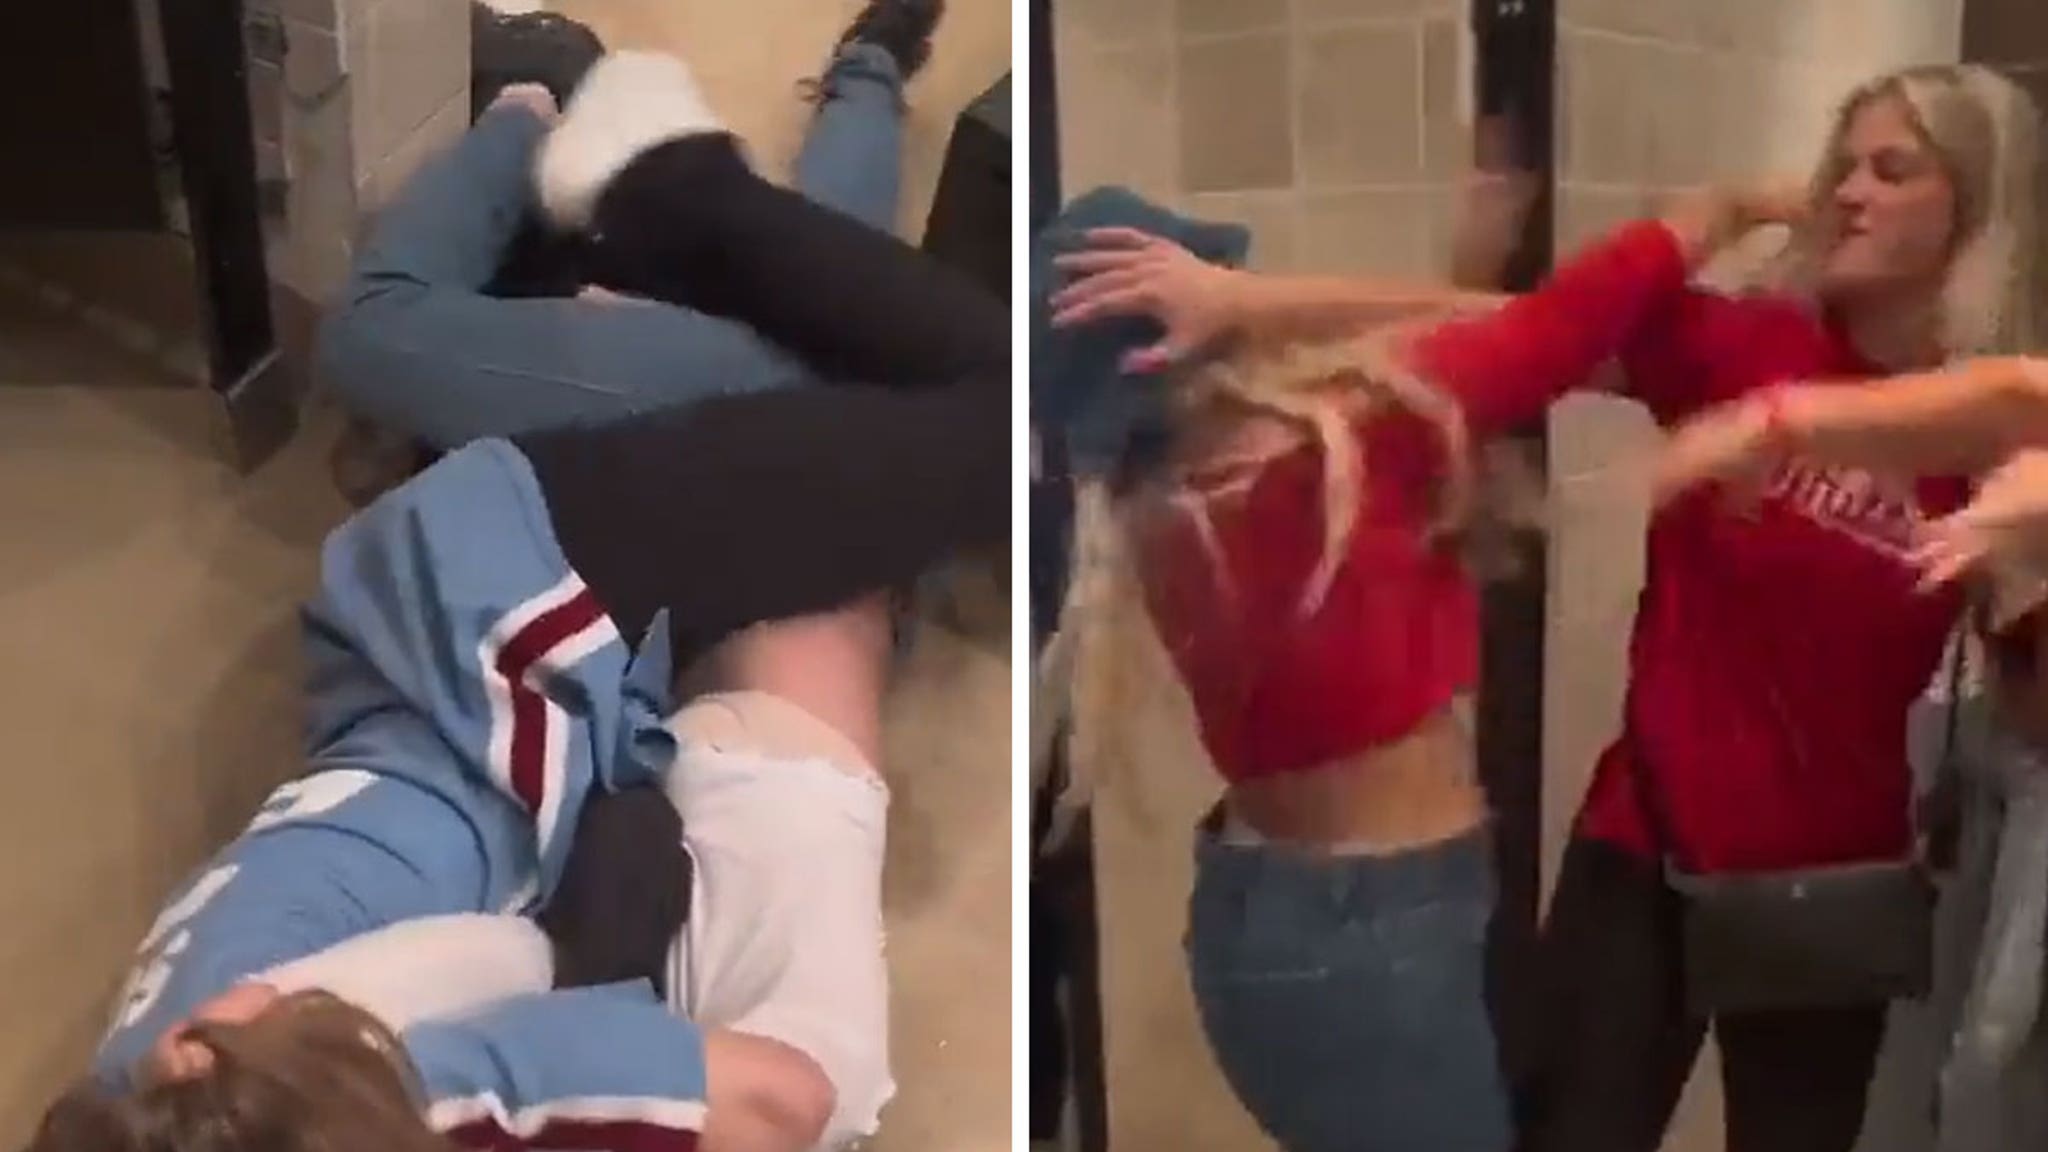 Phillies Fans Brawl In Women's Bathroom After World Series Loss